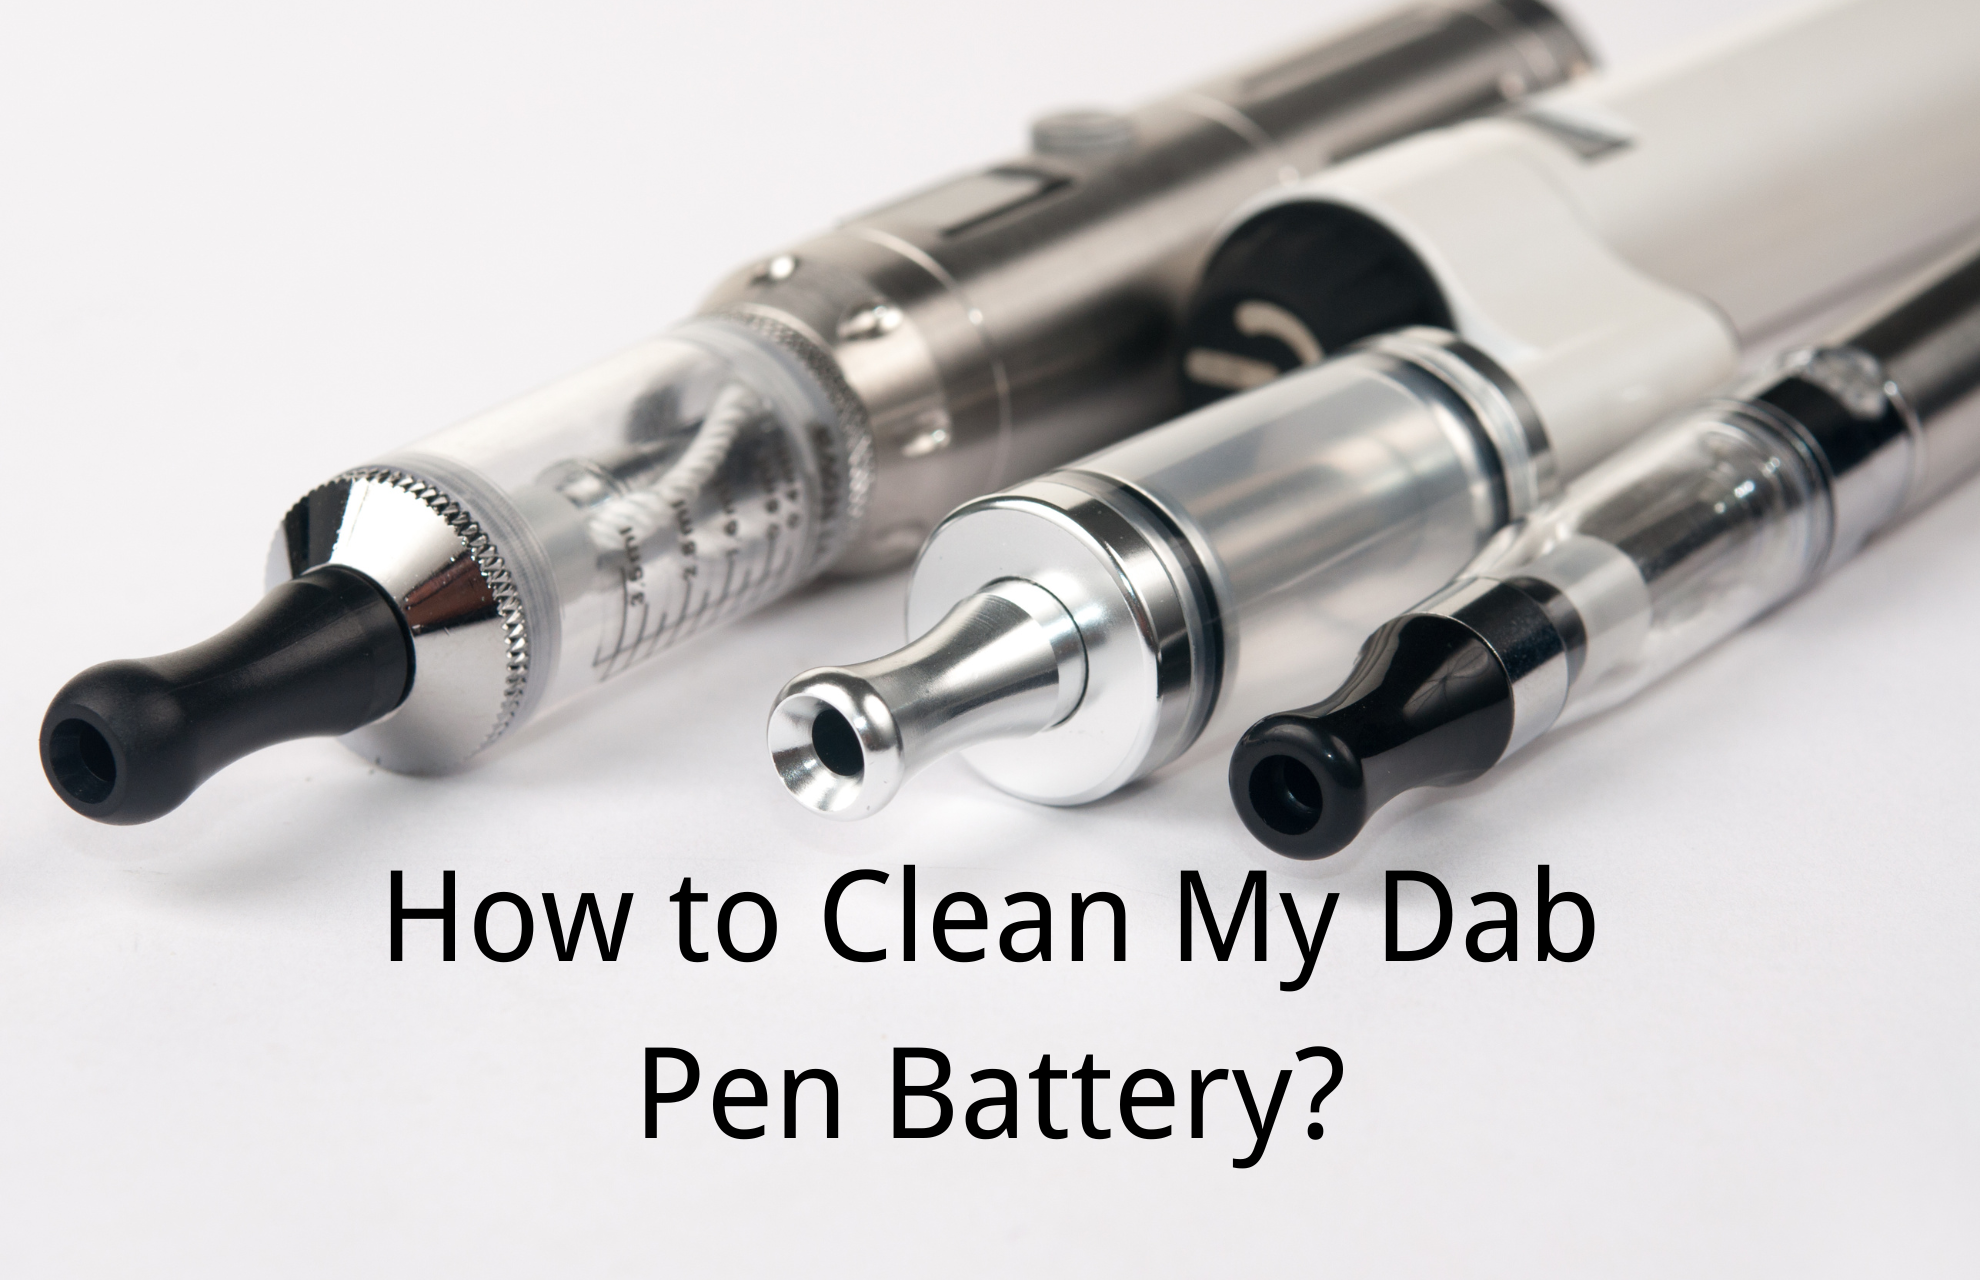 How to Clean My Dab Pen Battery? Instructions